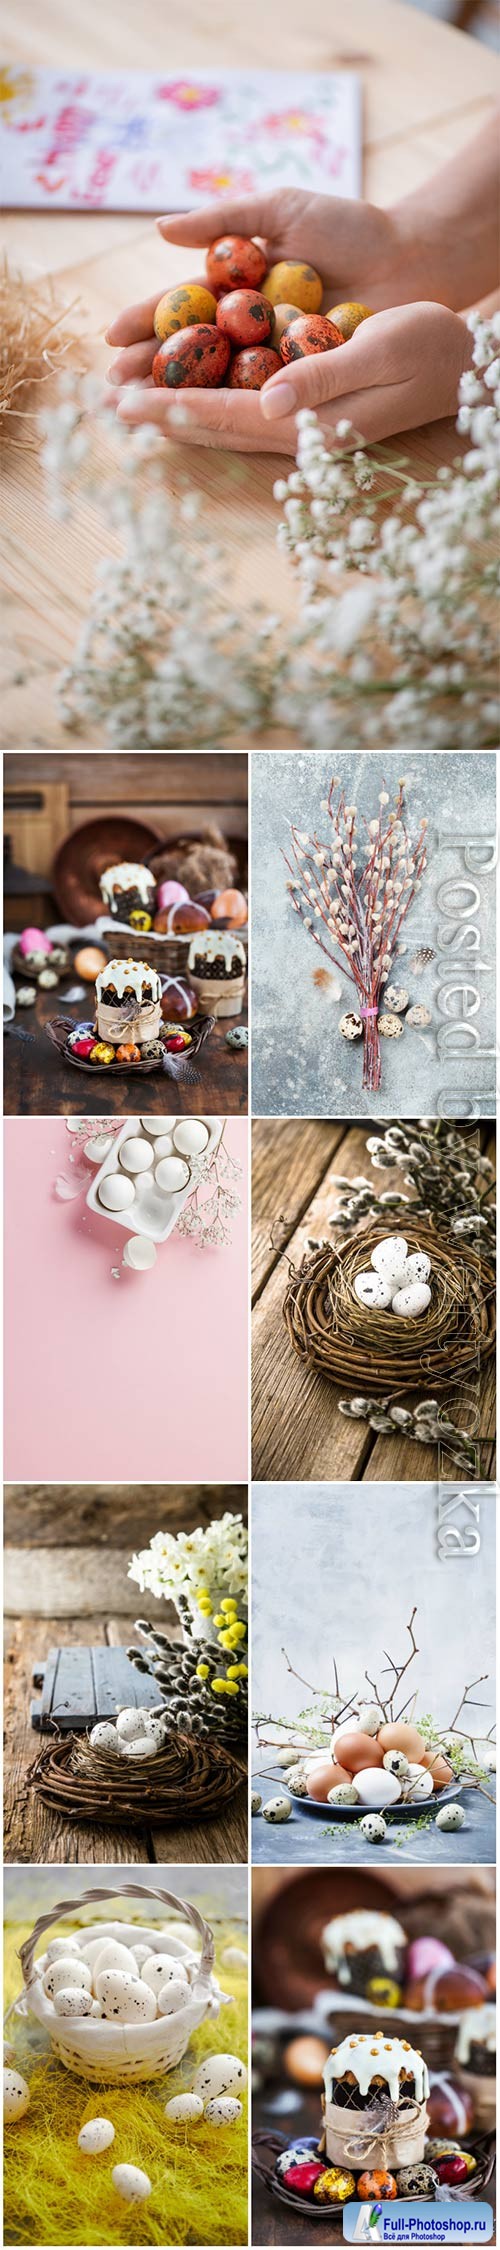 Happy Easter stock photo, Easter eggs, spring flowers # 12